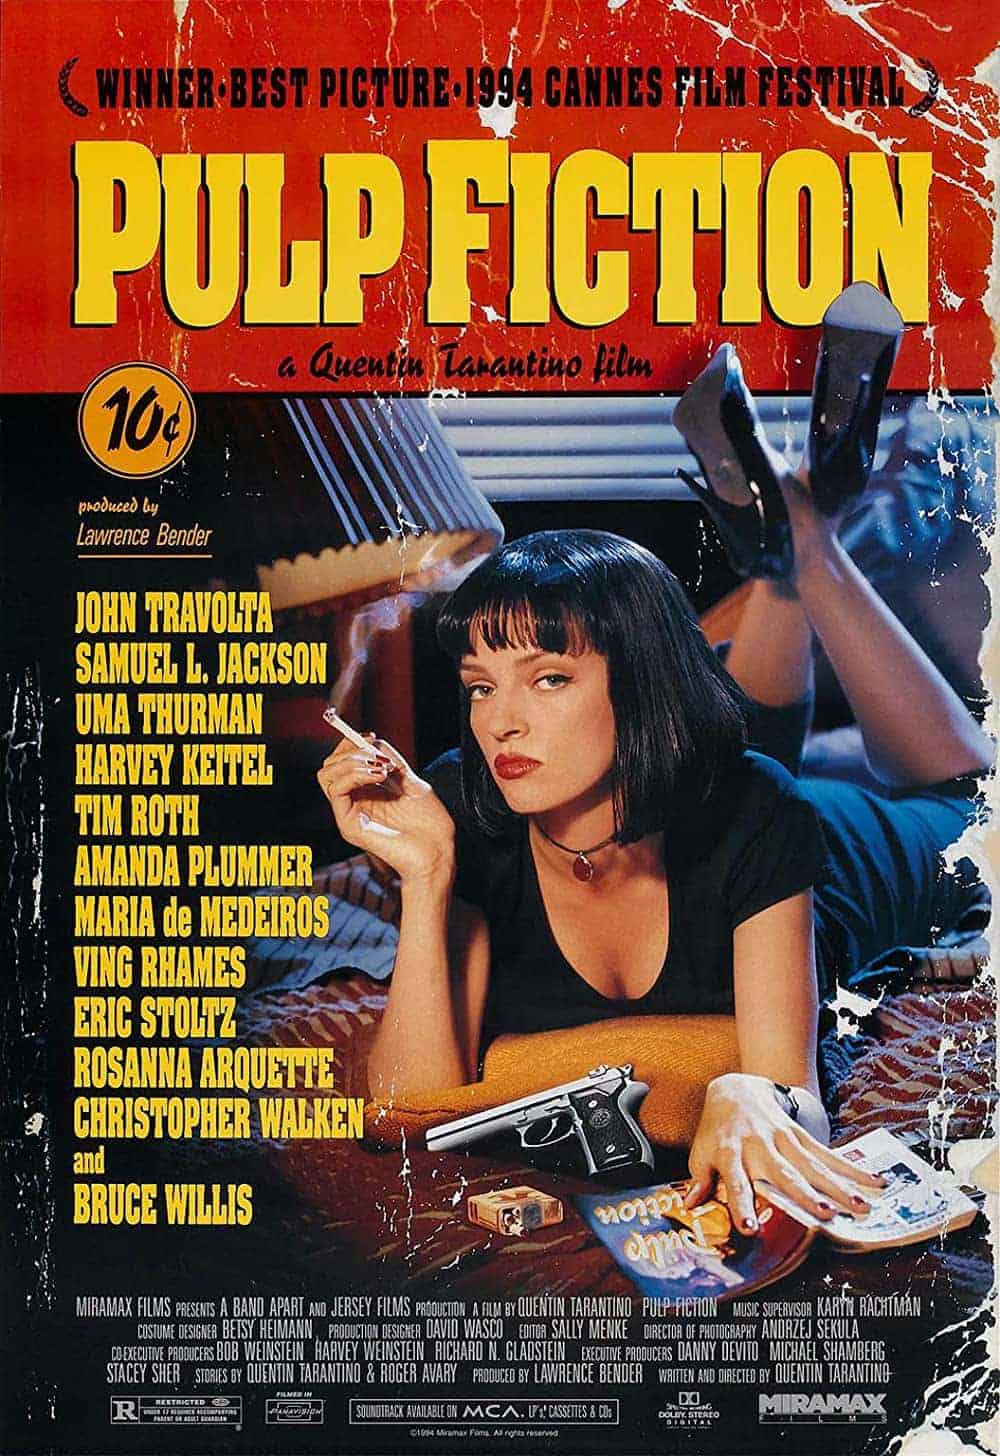 Pulp Fiction (1994) Cult Movies You Should Binge-Watch this Holiday